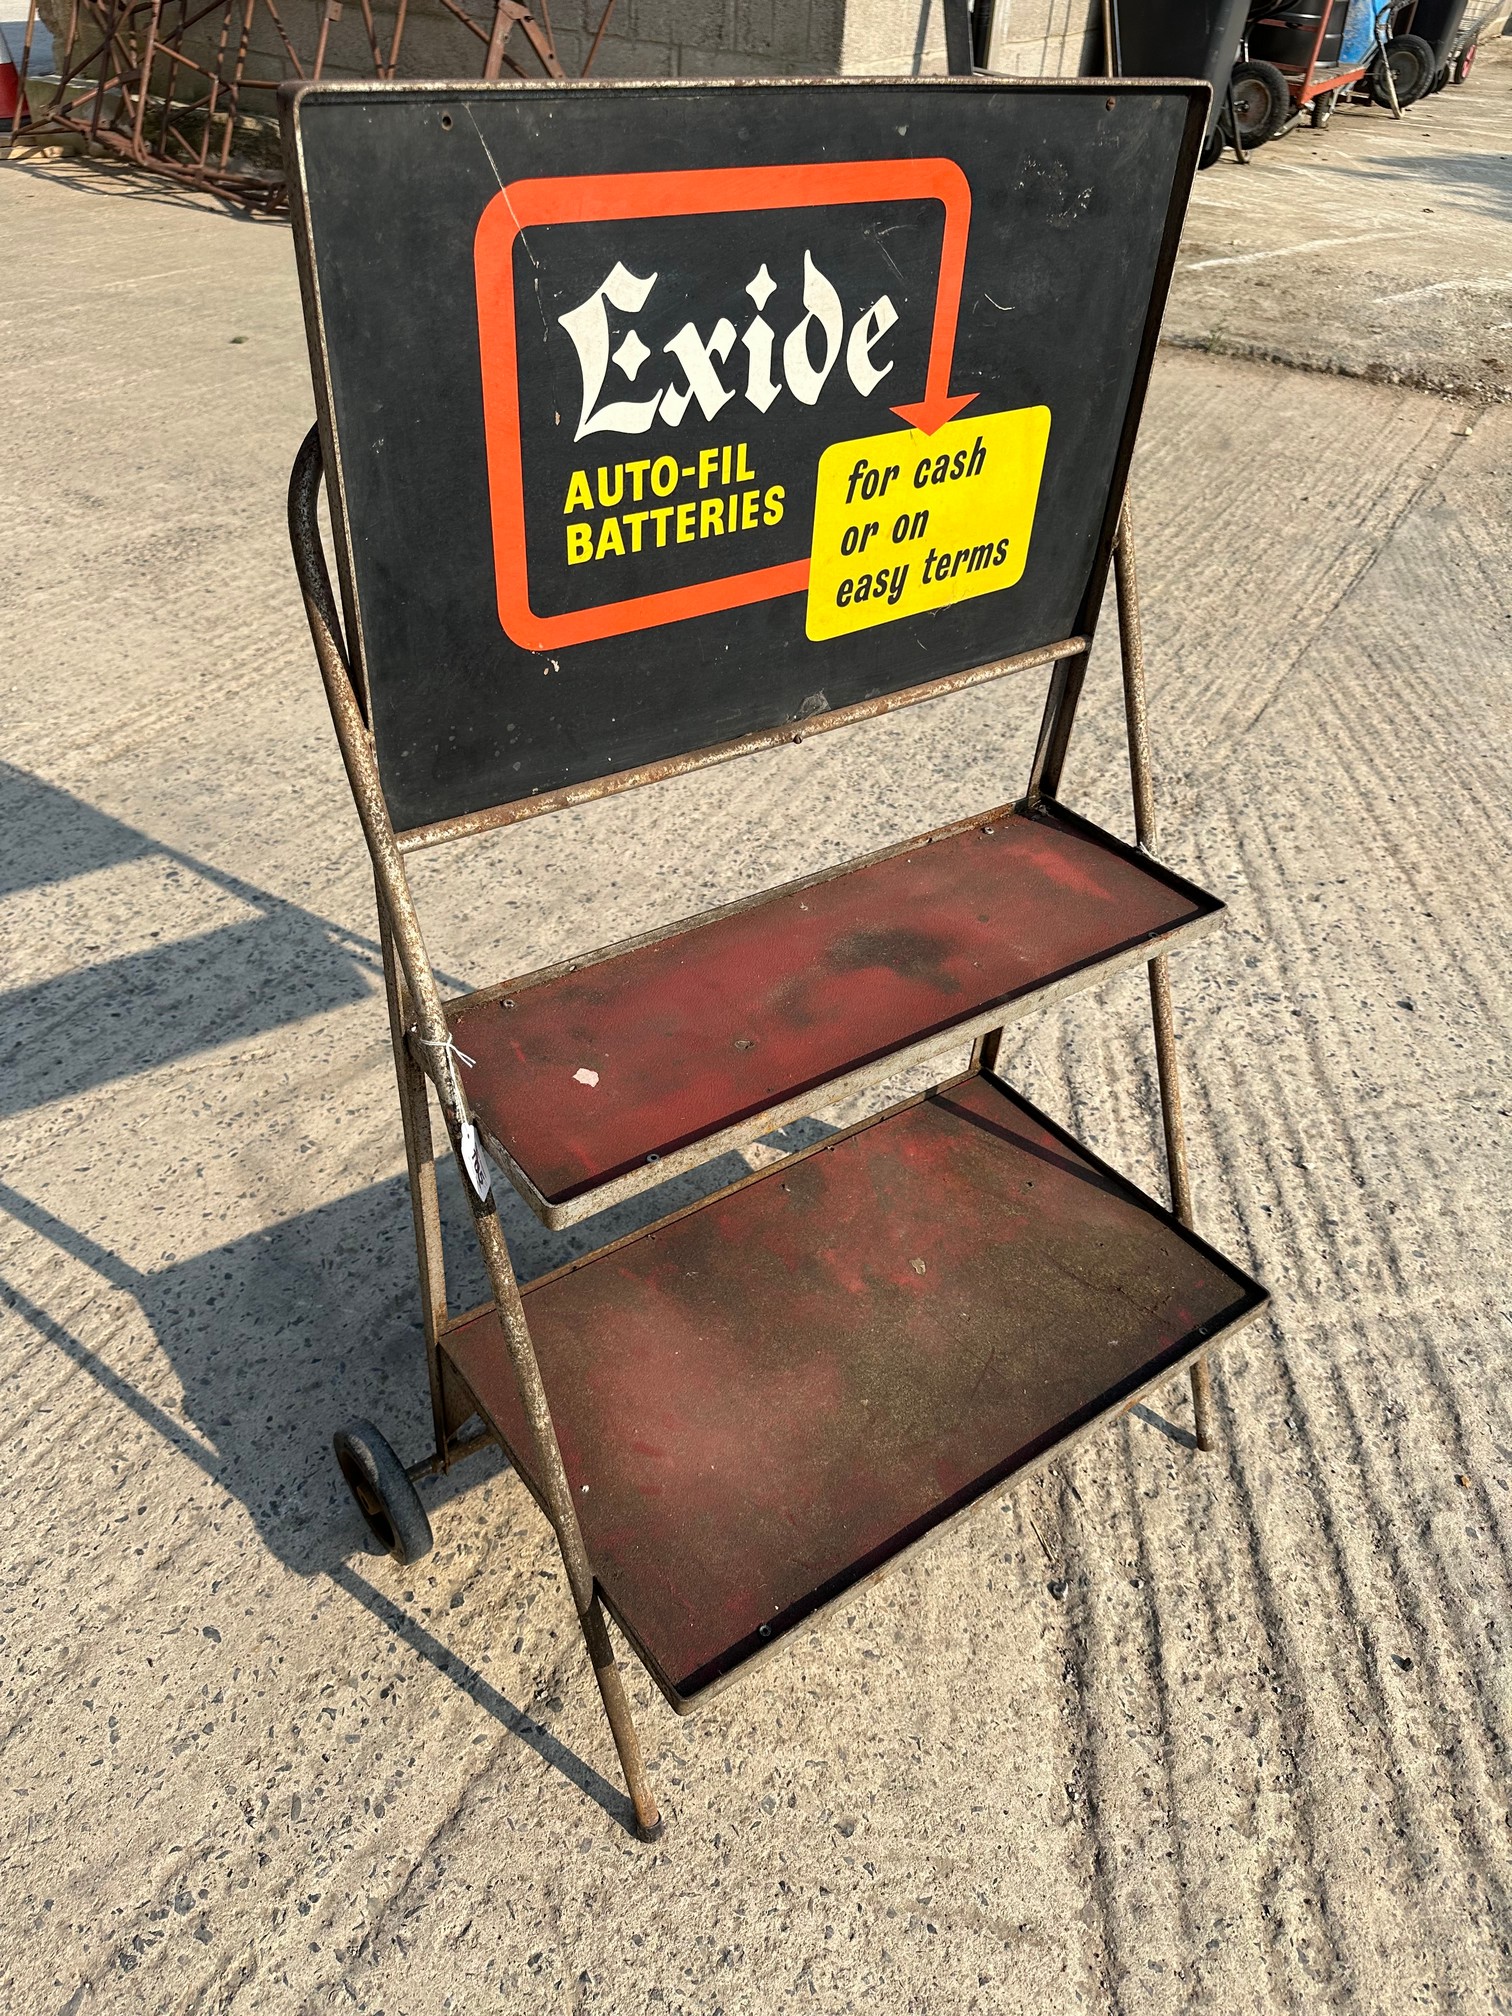 A garage forecourt two tier trolley with pediment sign advertising Exide Auto-Fil Batteries.